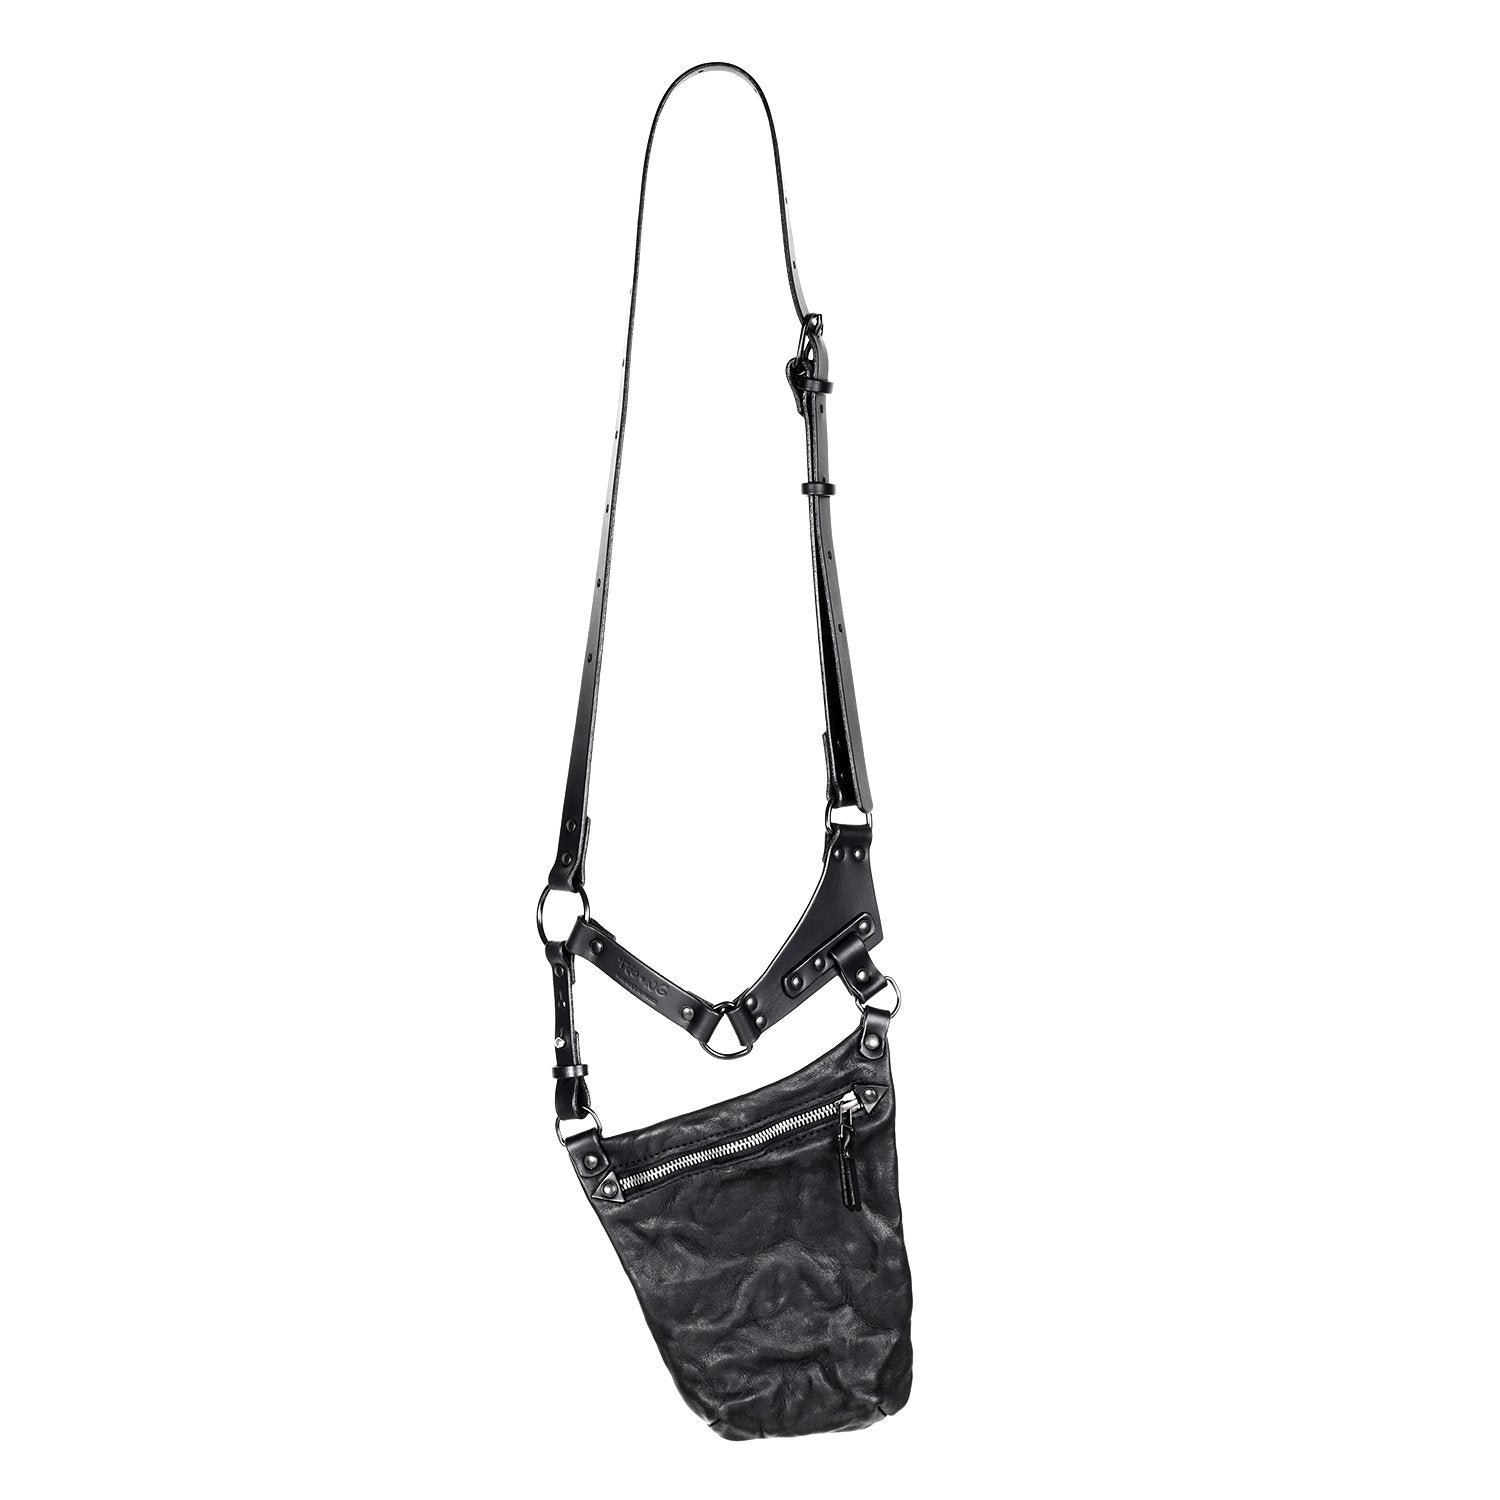 A3TEPHRA 823BLACK"Make a statement with our handmade Black Harness Pouch. Versatile and functional, wear it as a cross-body or belt bag. With its high-quality vegetable tanned leatheAccessori UnisexLA HAINE INSIDE USTEPHRAA3TEPHRA 823BLACK